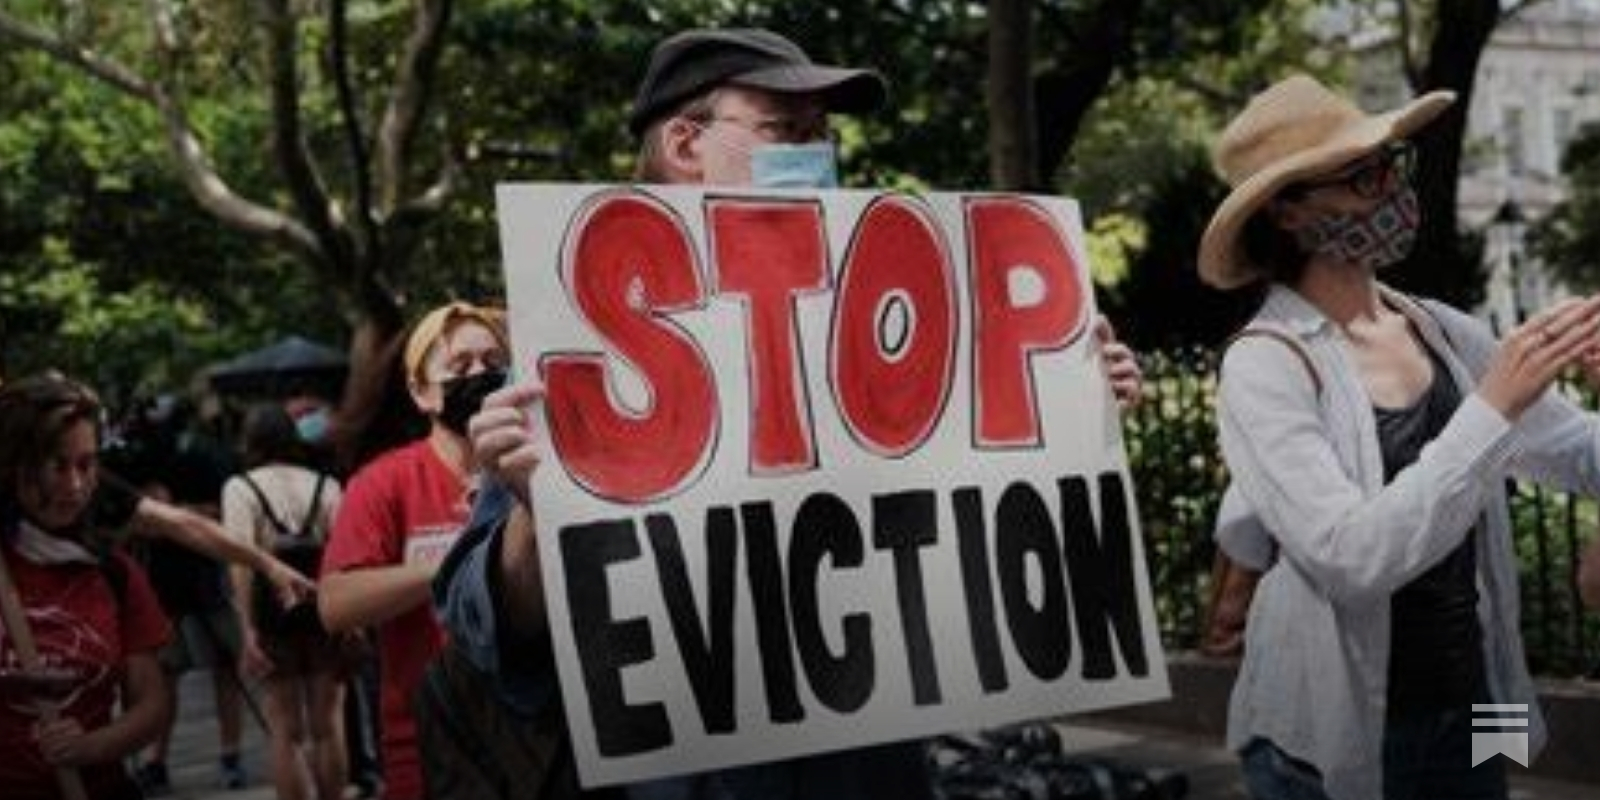 Just Cause Eviction Makes Getting Rid of Bad Tenants Harder